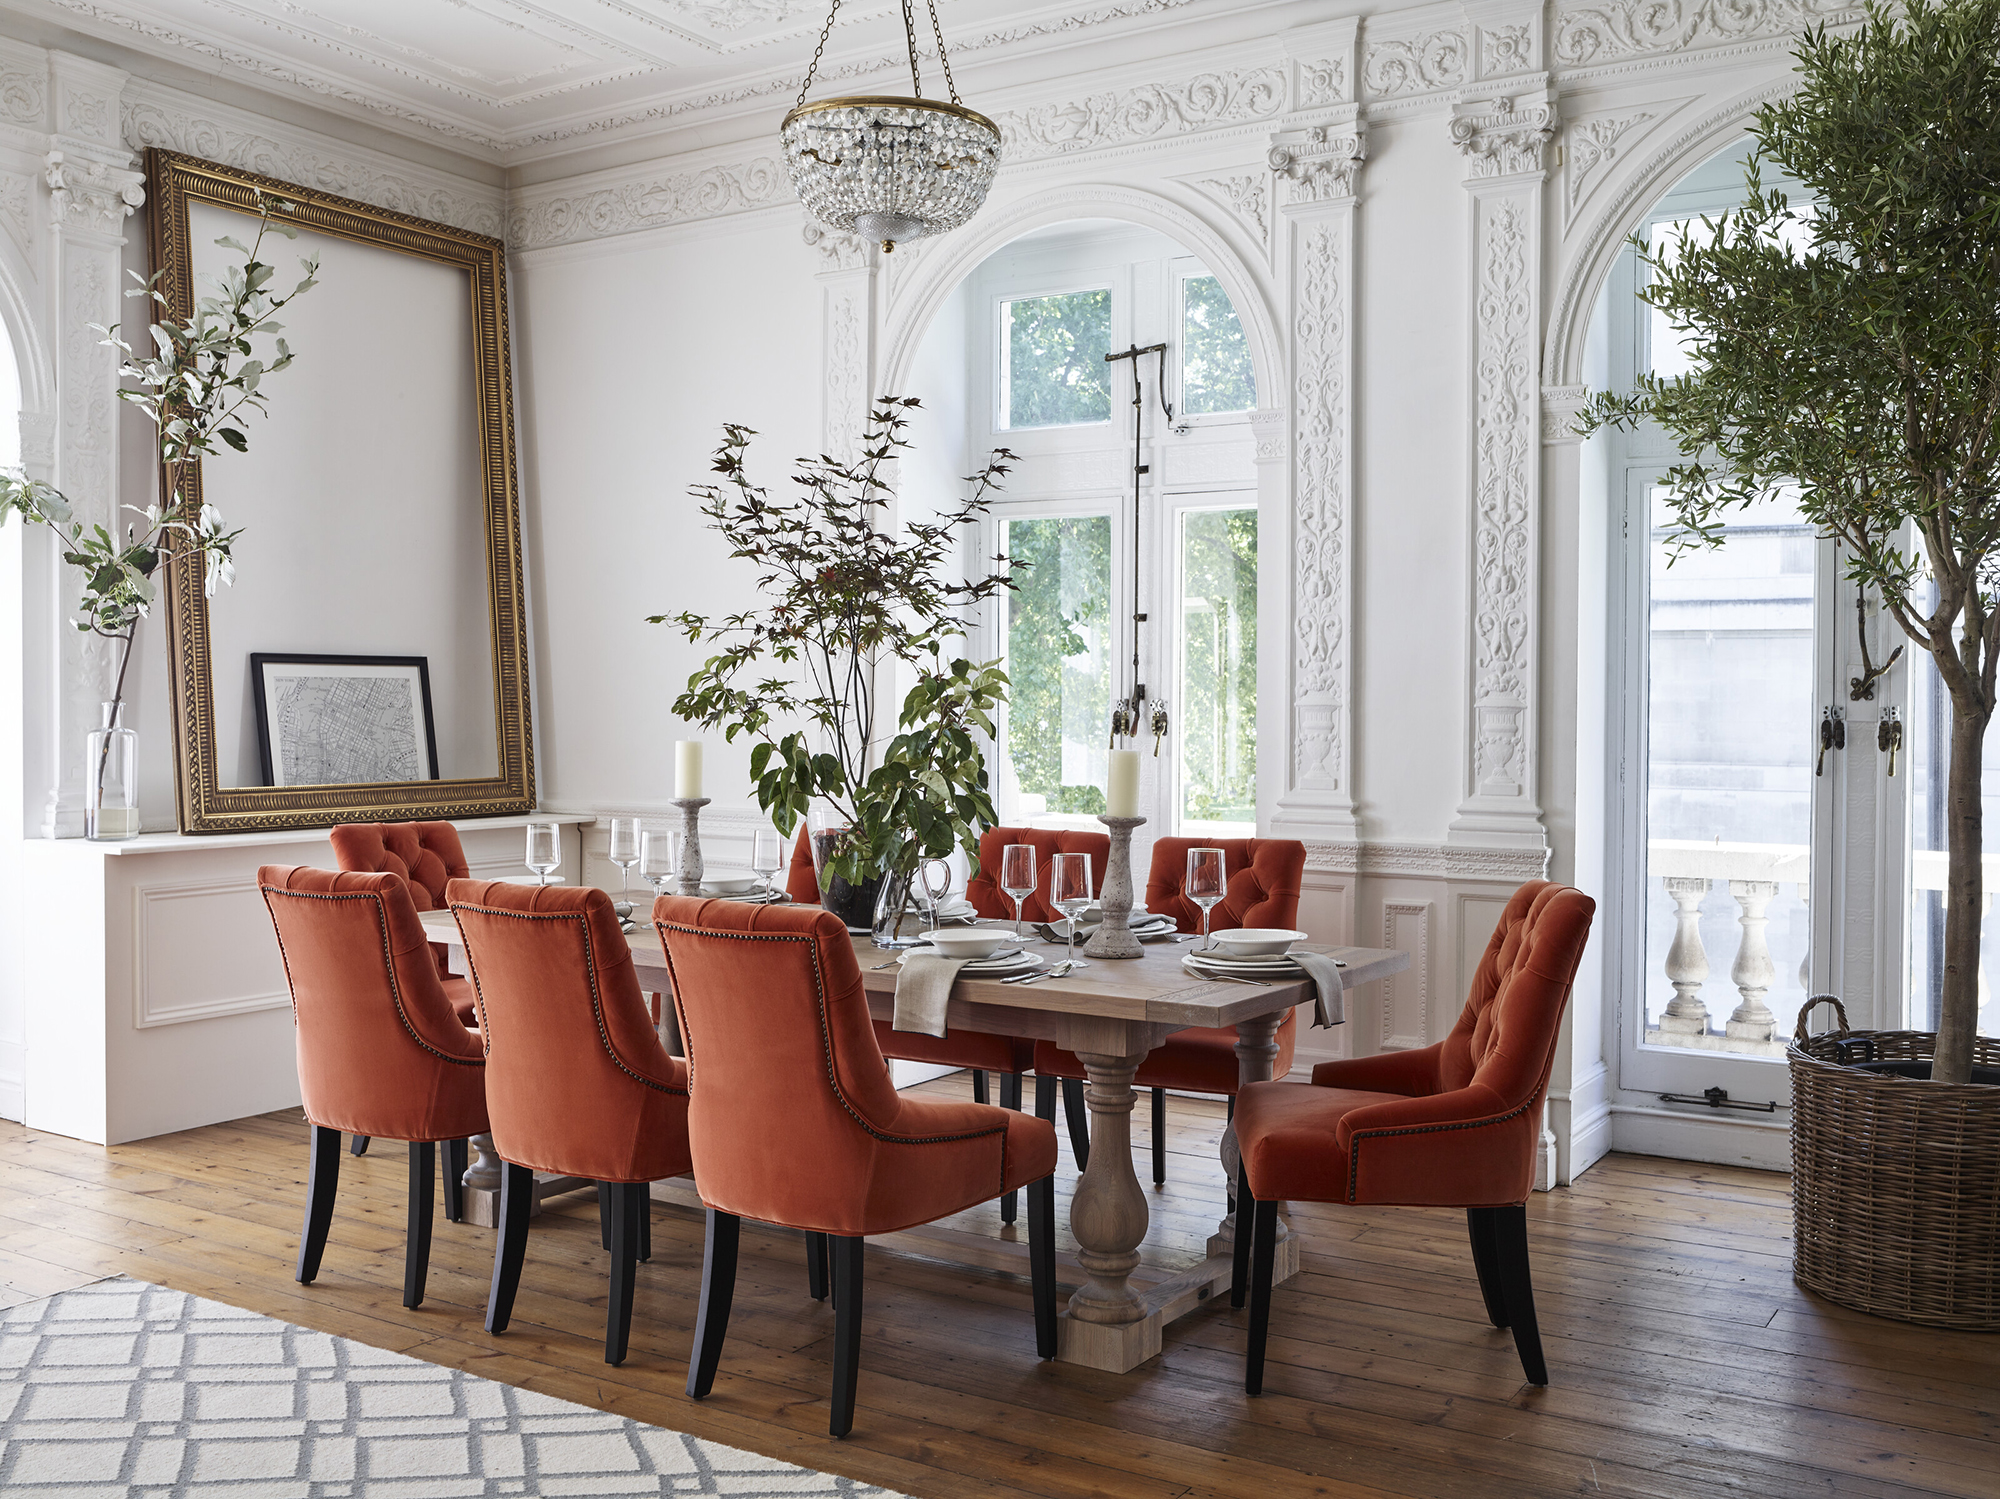 How to Pick the Right Dining Chair Size and Style - How to Decorate